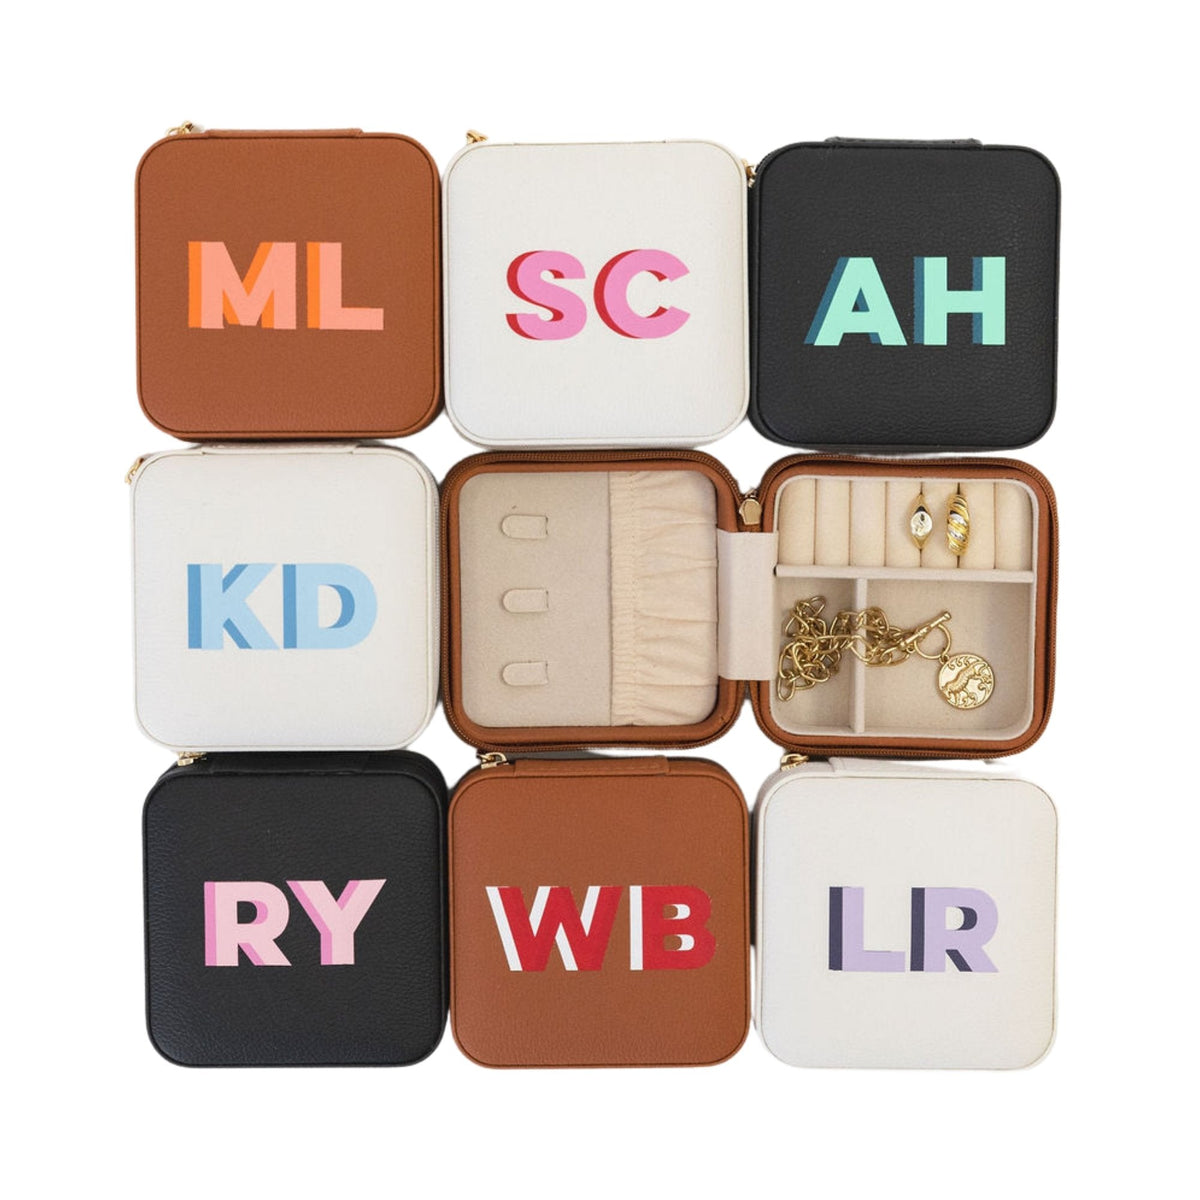 Cowgirl Jewelry Box, Punchy Cowboy Jewelry Travel Case, Need More Cowboys,  Purse Jewelry Holder. Monogram Personalized Jewelry Travel Case